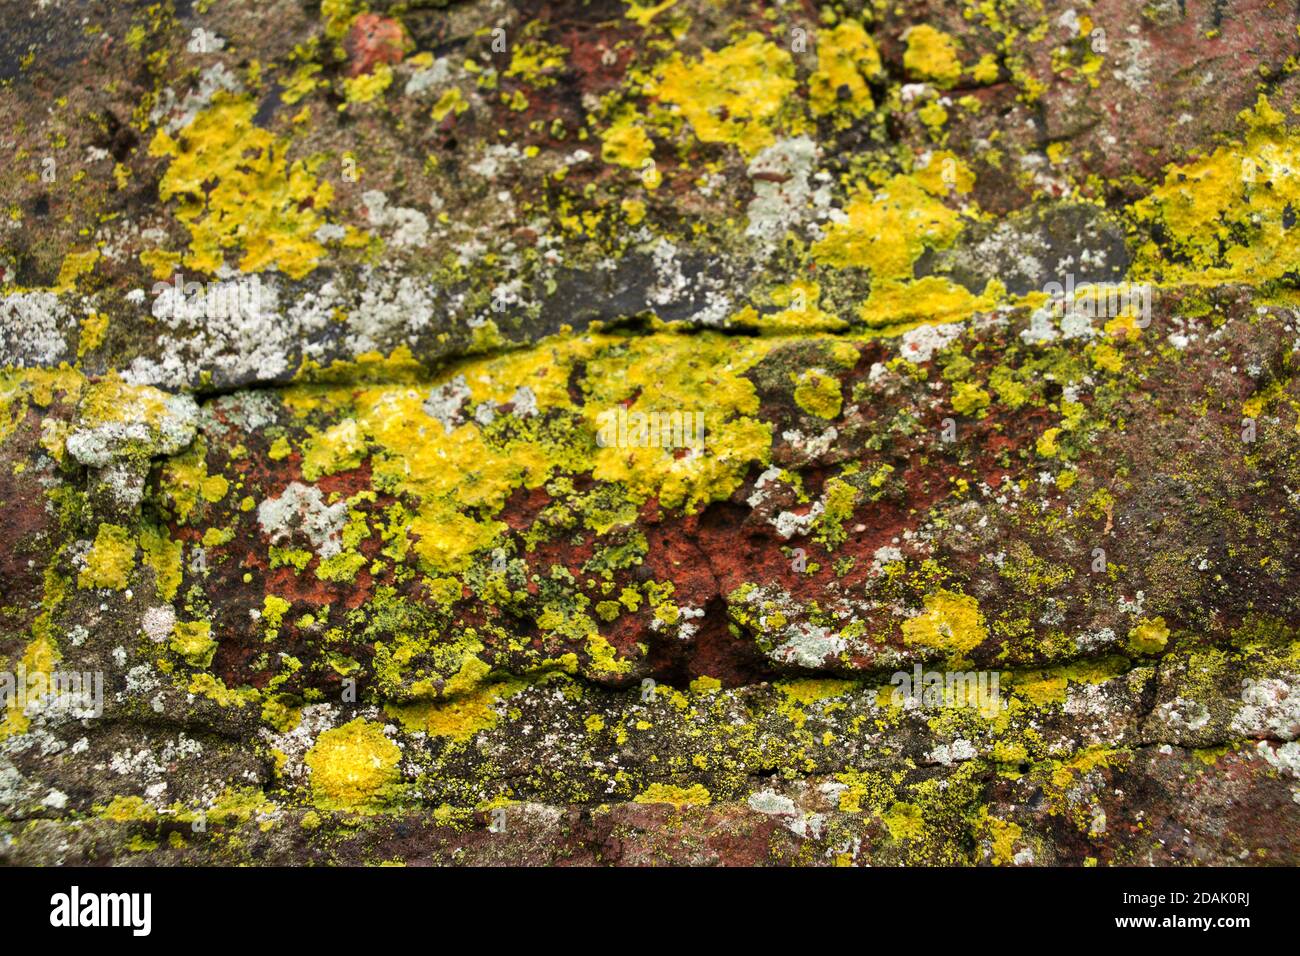 The common yellow lichen, Candelariella vitelline, grows on many surface types ranging from wood to rock and masonry. Stock Photo